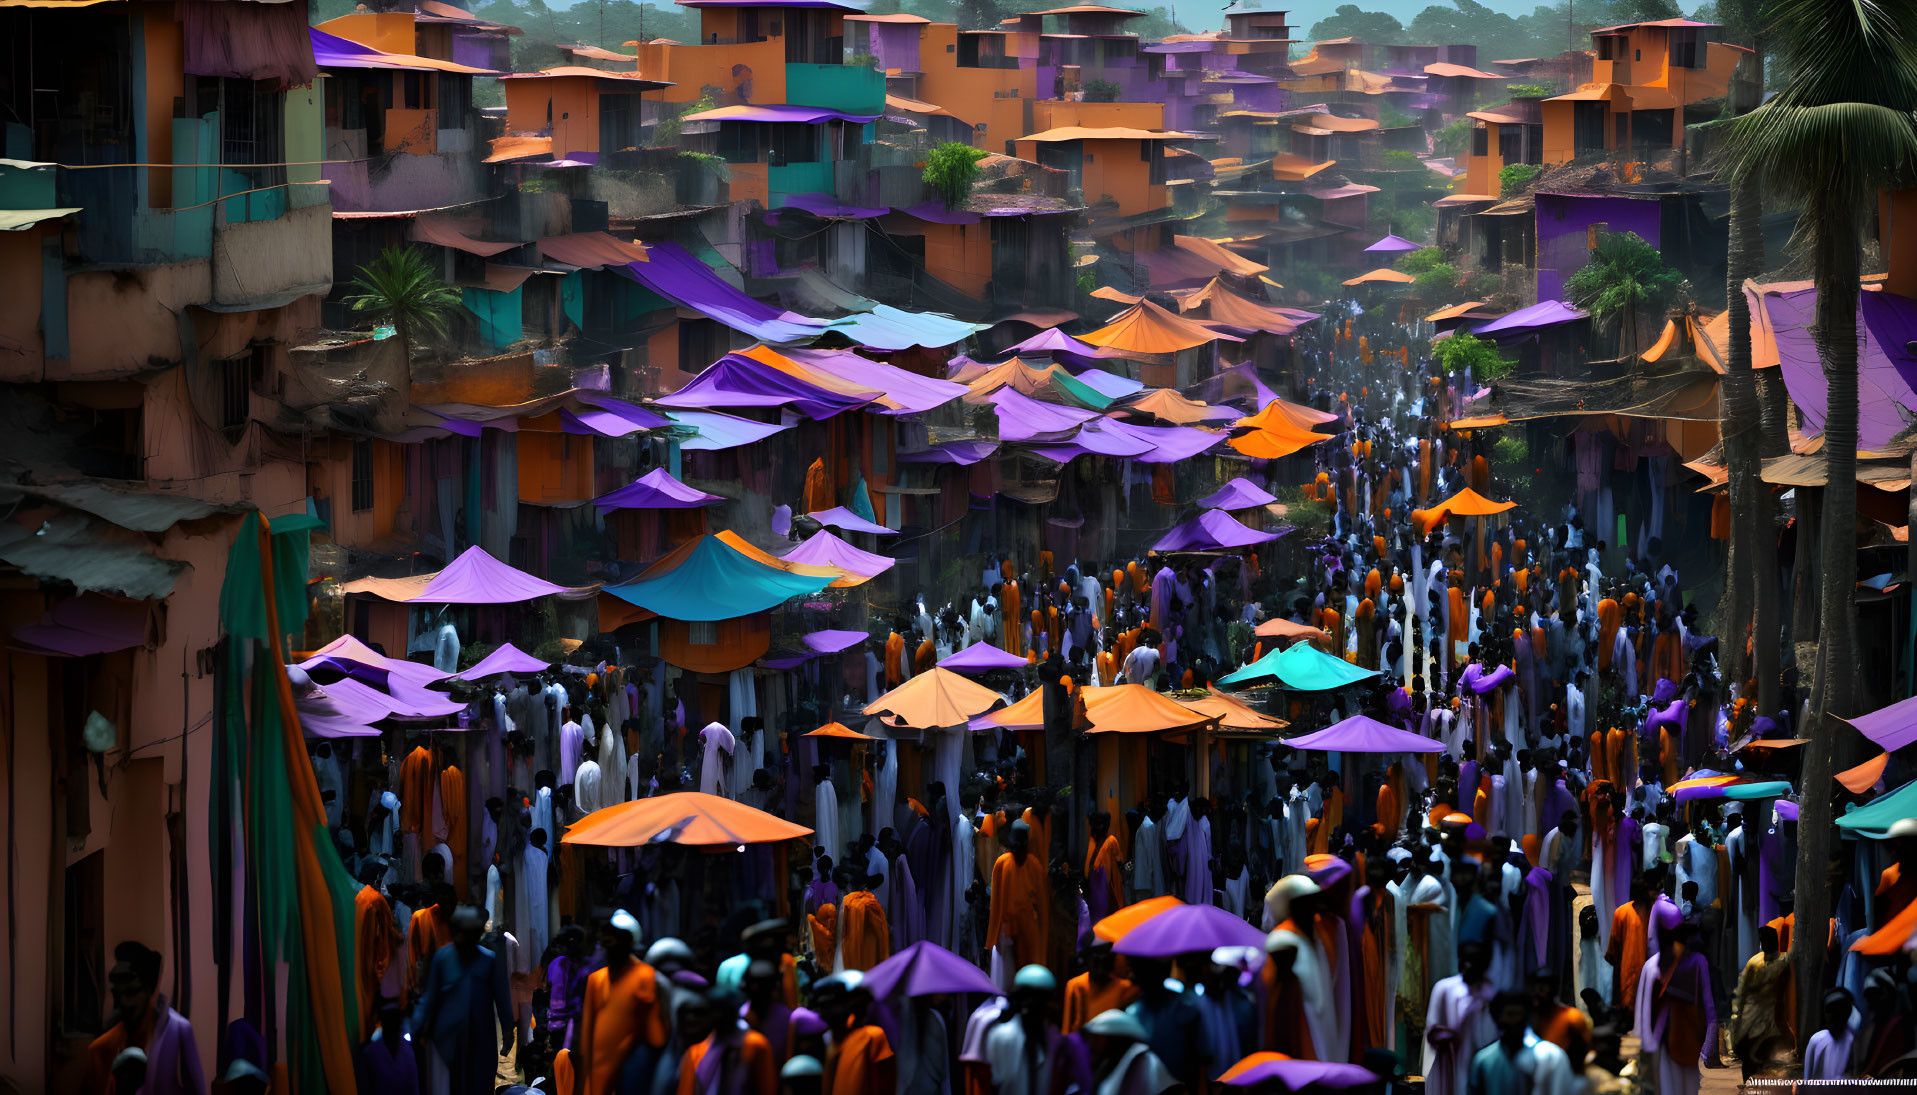 Vibrant street scene with people in orange and purple amidst colorful buildings